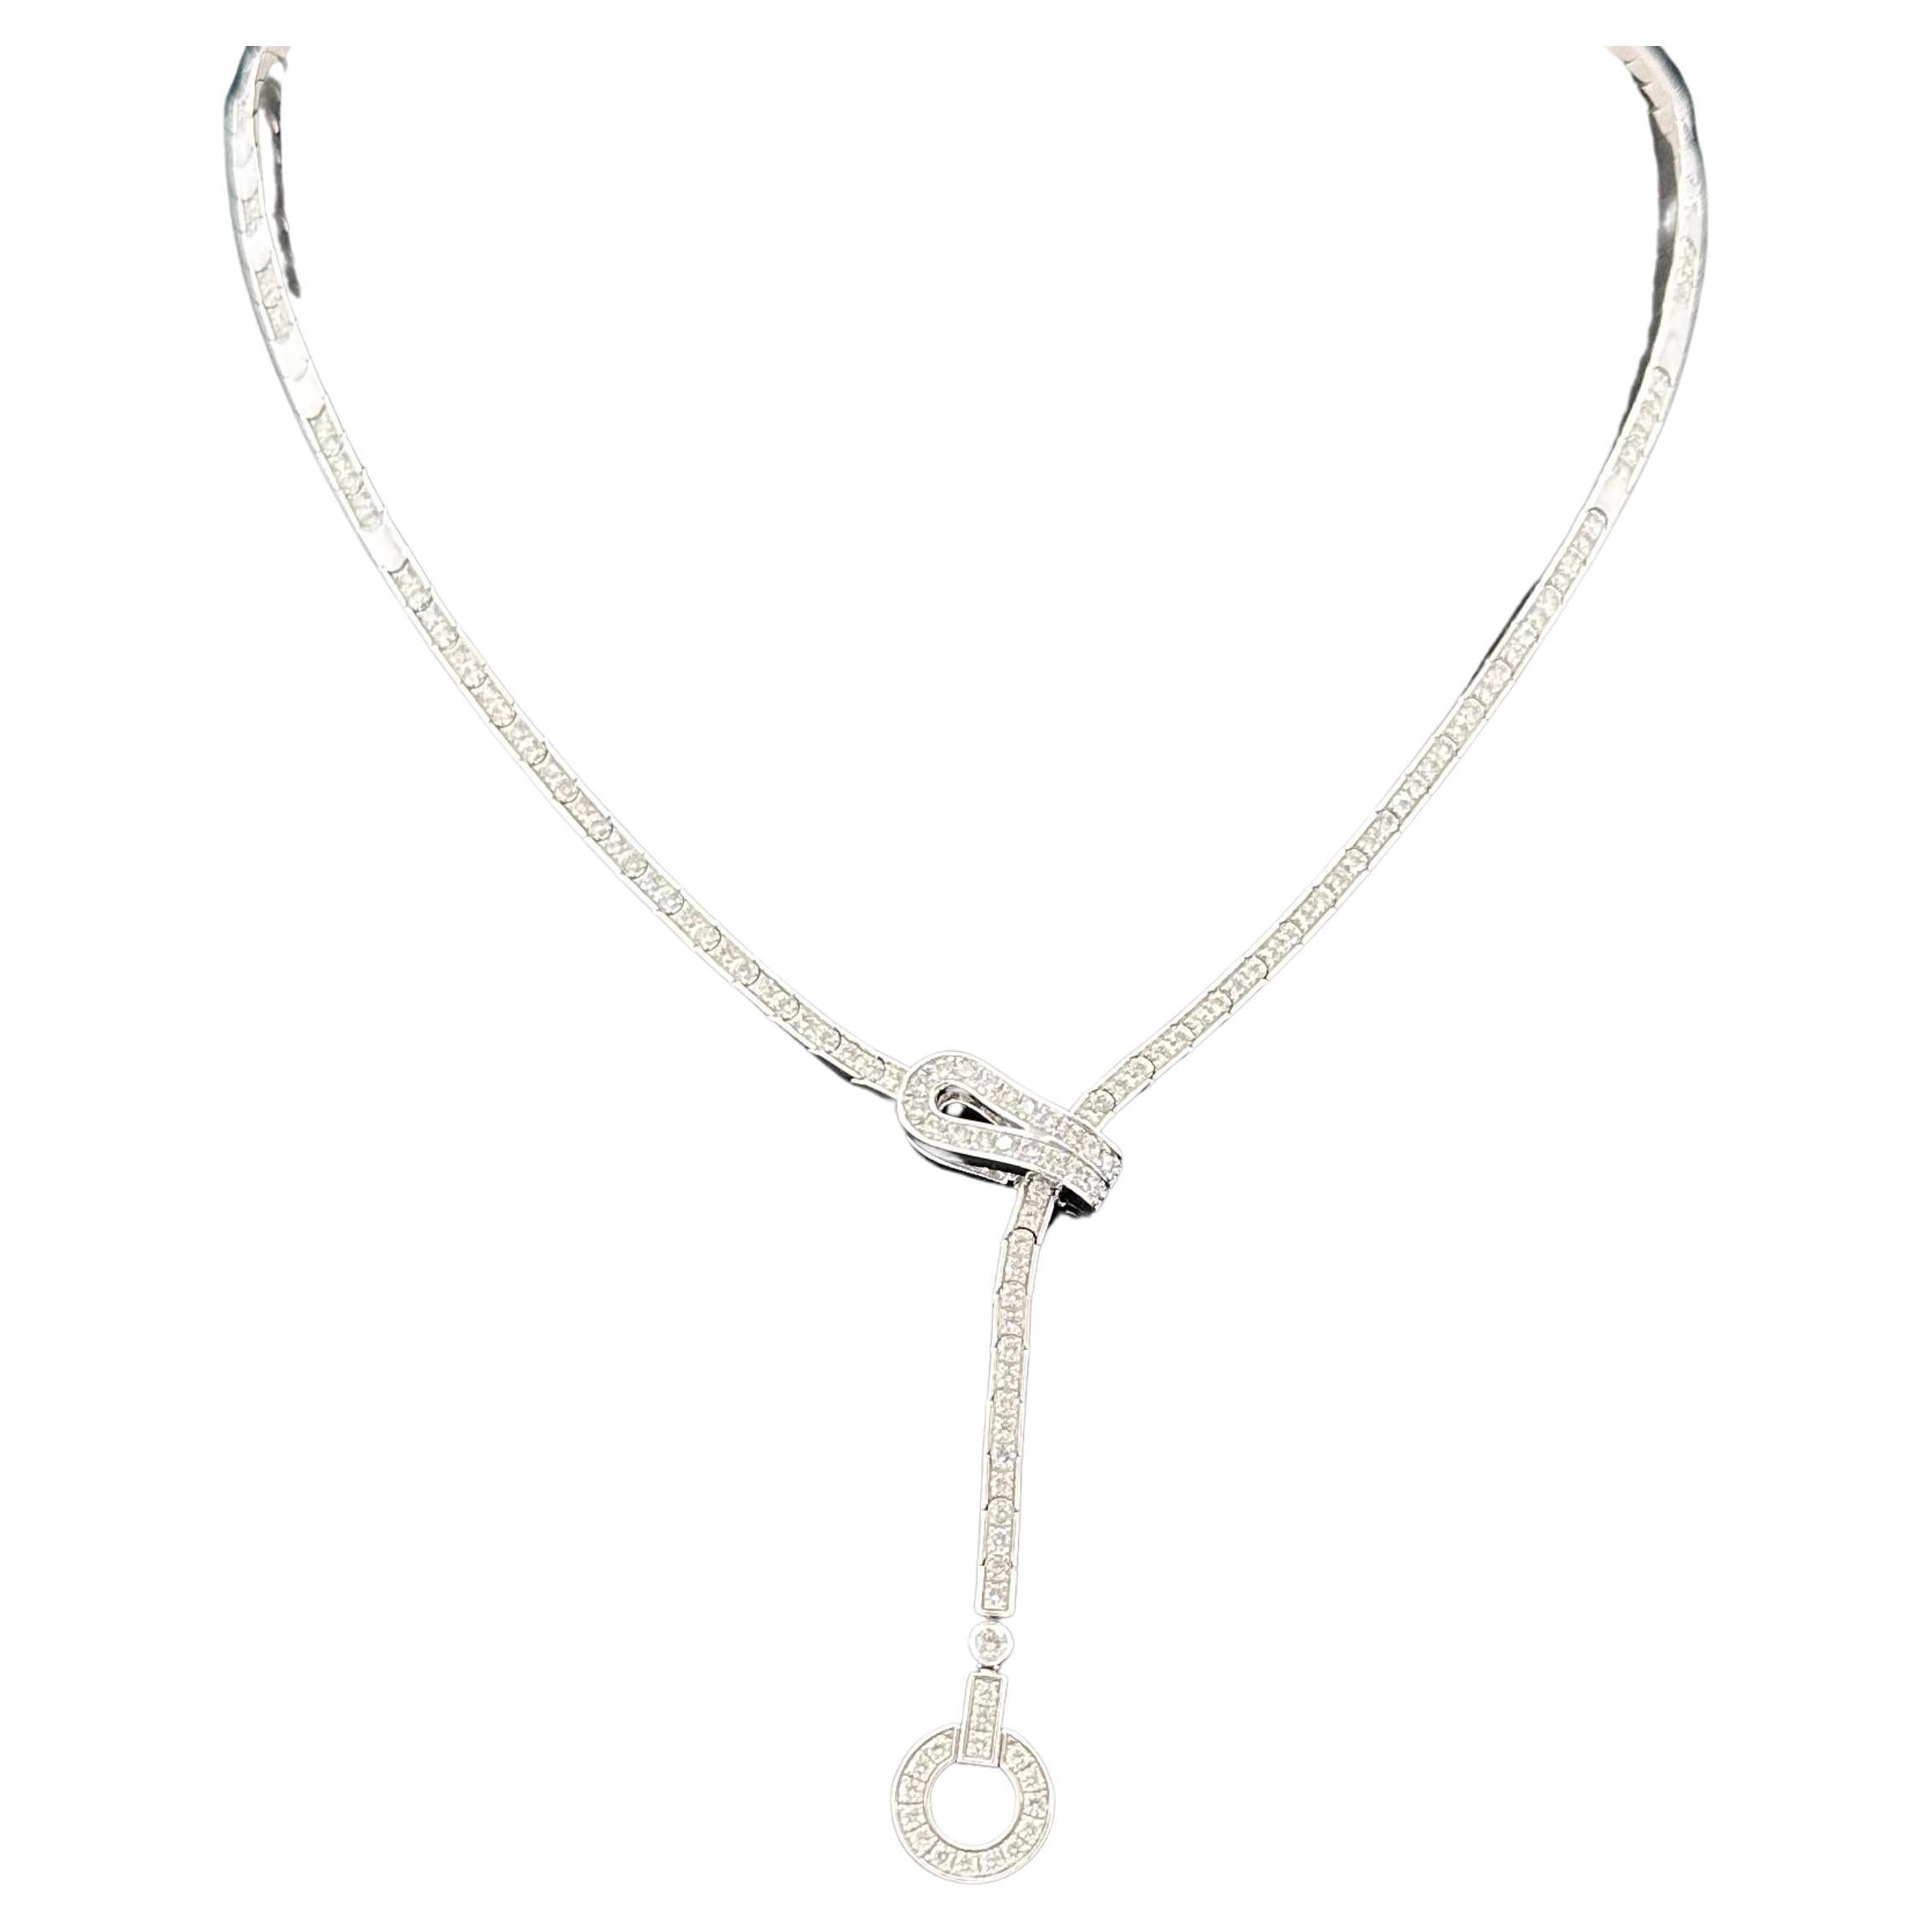 Cartier Agrafe Collection Necklace circa 2010 Inspired by the Hook, and Eye Corset Fastening. Agrafe is a Cartier classic
French Hand Made with 18k White Gold Set - 150 round Diamonds in a lariat style necklace. 
Diamond Weight 3.75 cts
The length